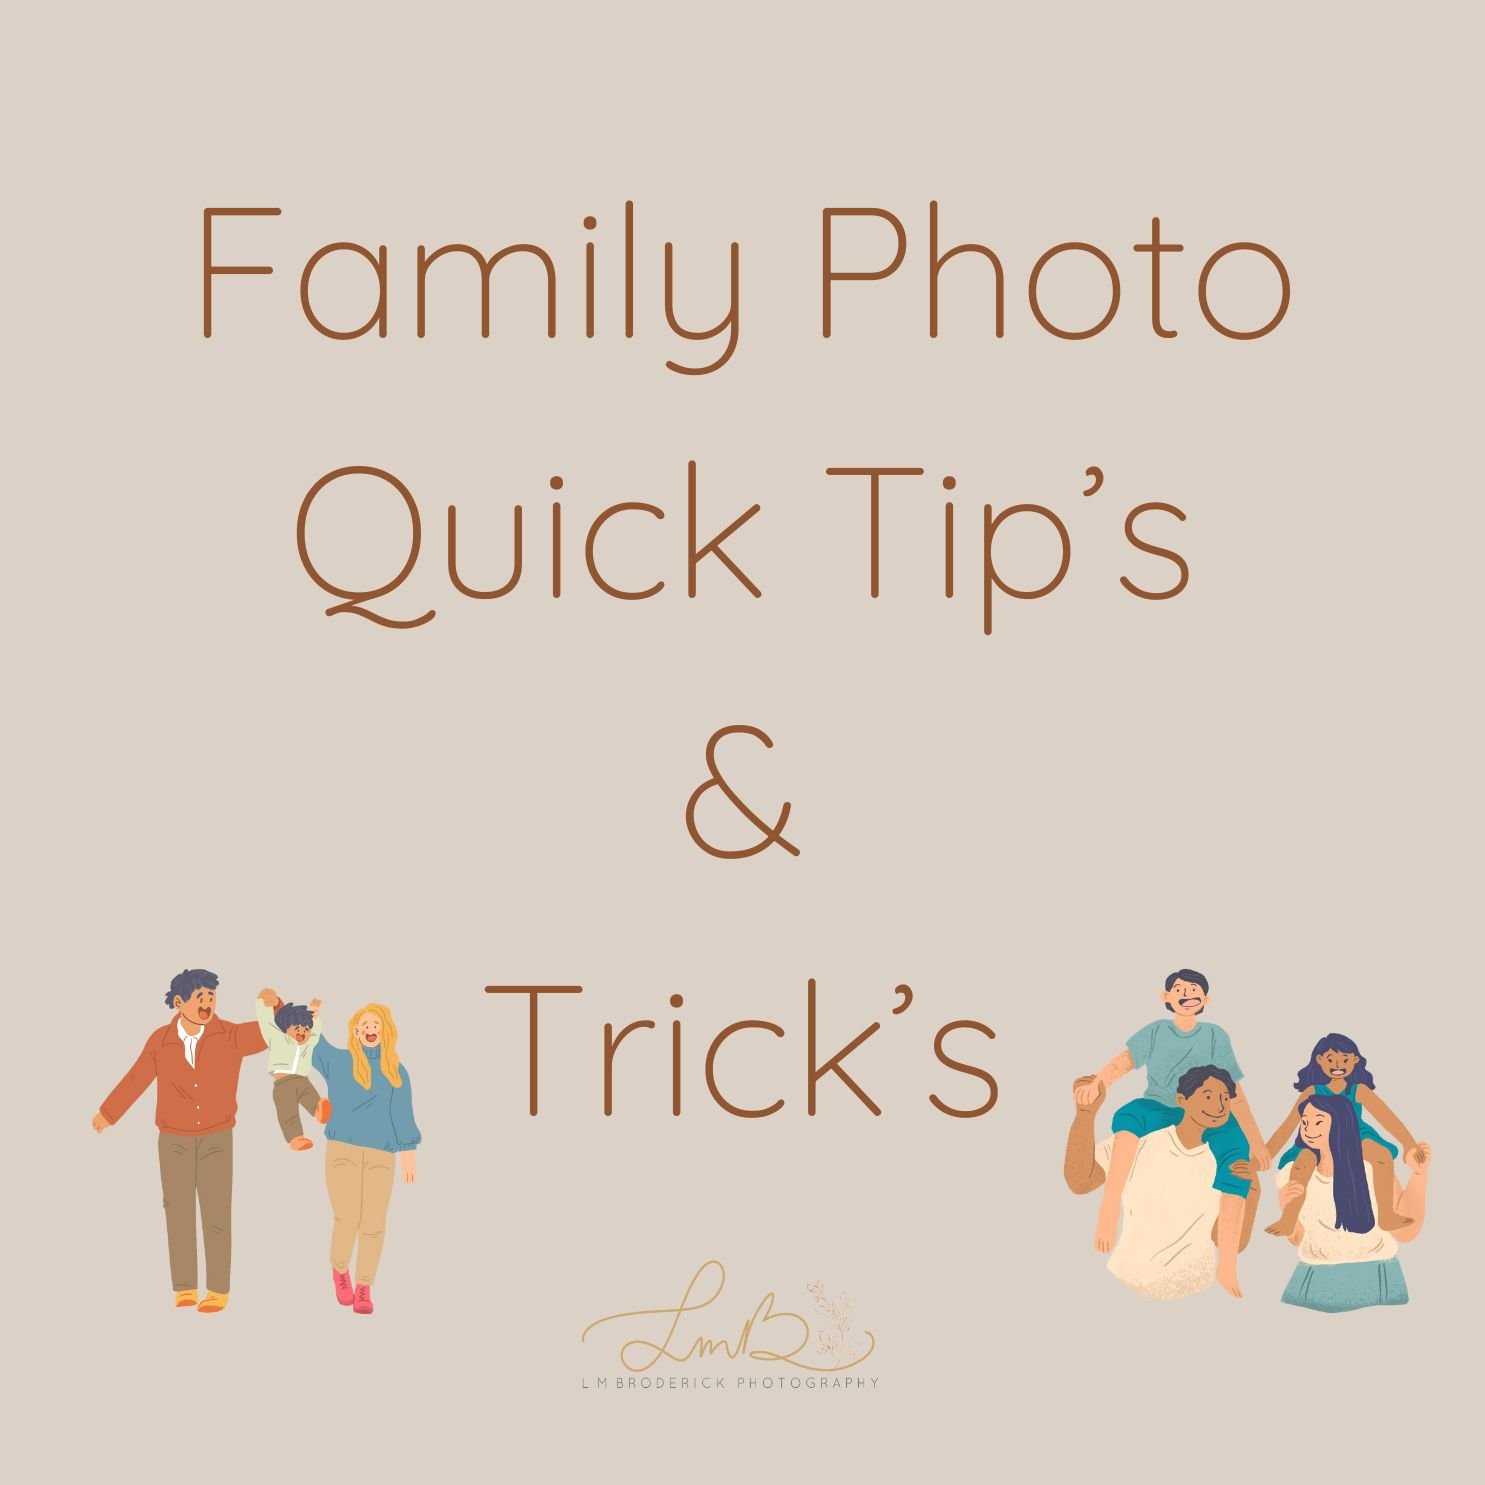 Wednesday's are for sharing helpful tips and tricks to make your portrait session with your family a little easier! 

Session tip #1: 
Let your kid bring their favorite toy or blanket! There are two awesome perks to this. First, it can make them more